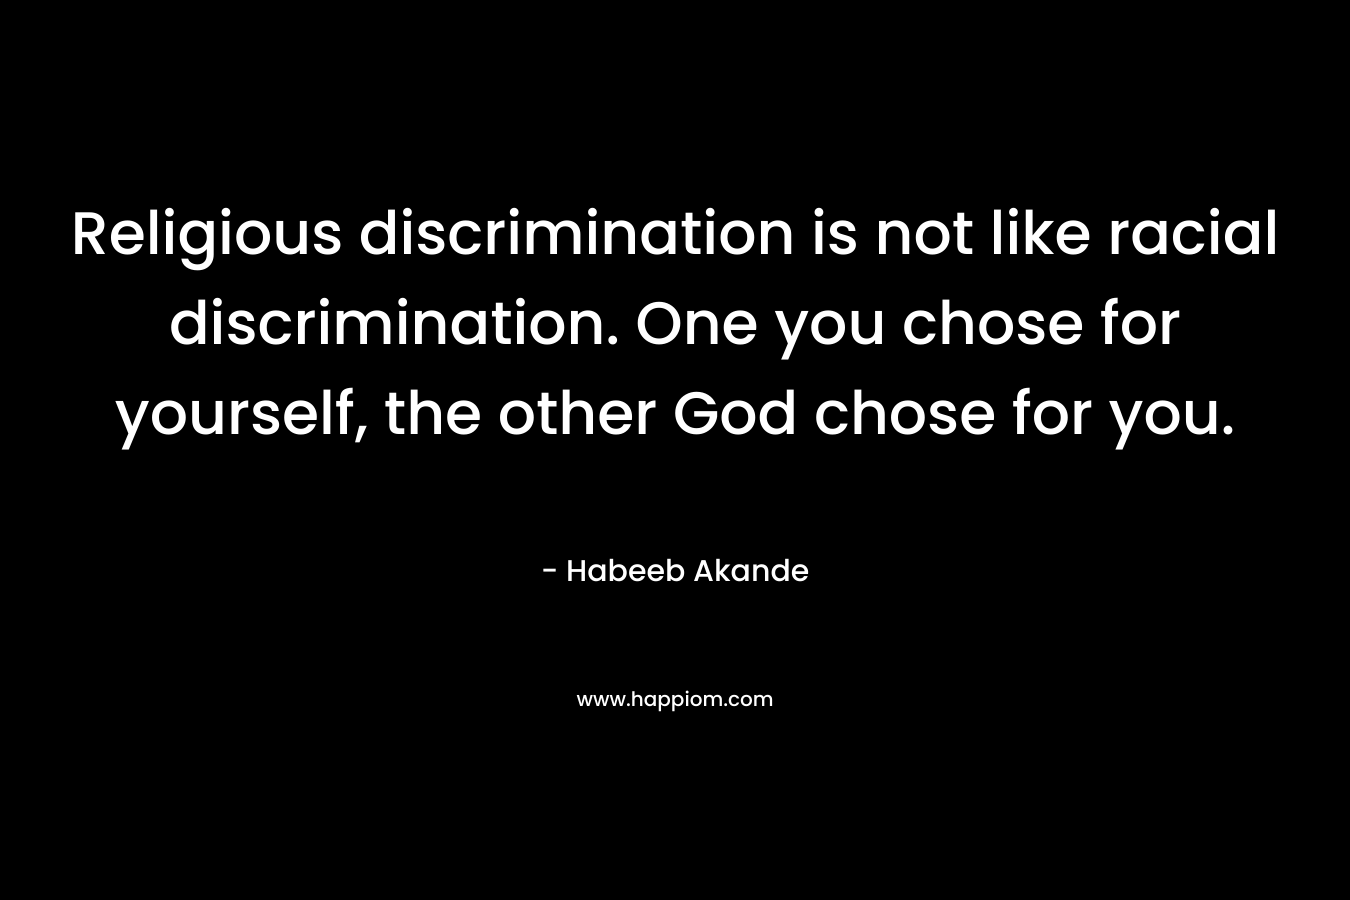 Religious discrimination is not like racial discrimination. One you chose for yourself, the other God chose for you.